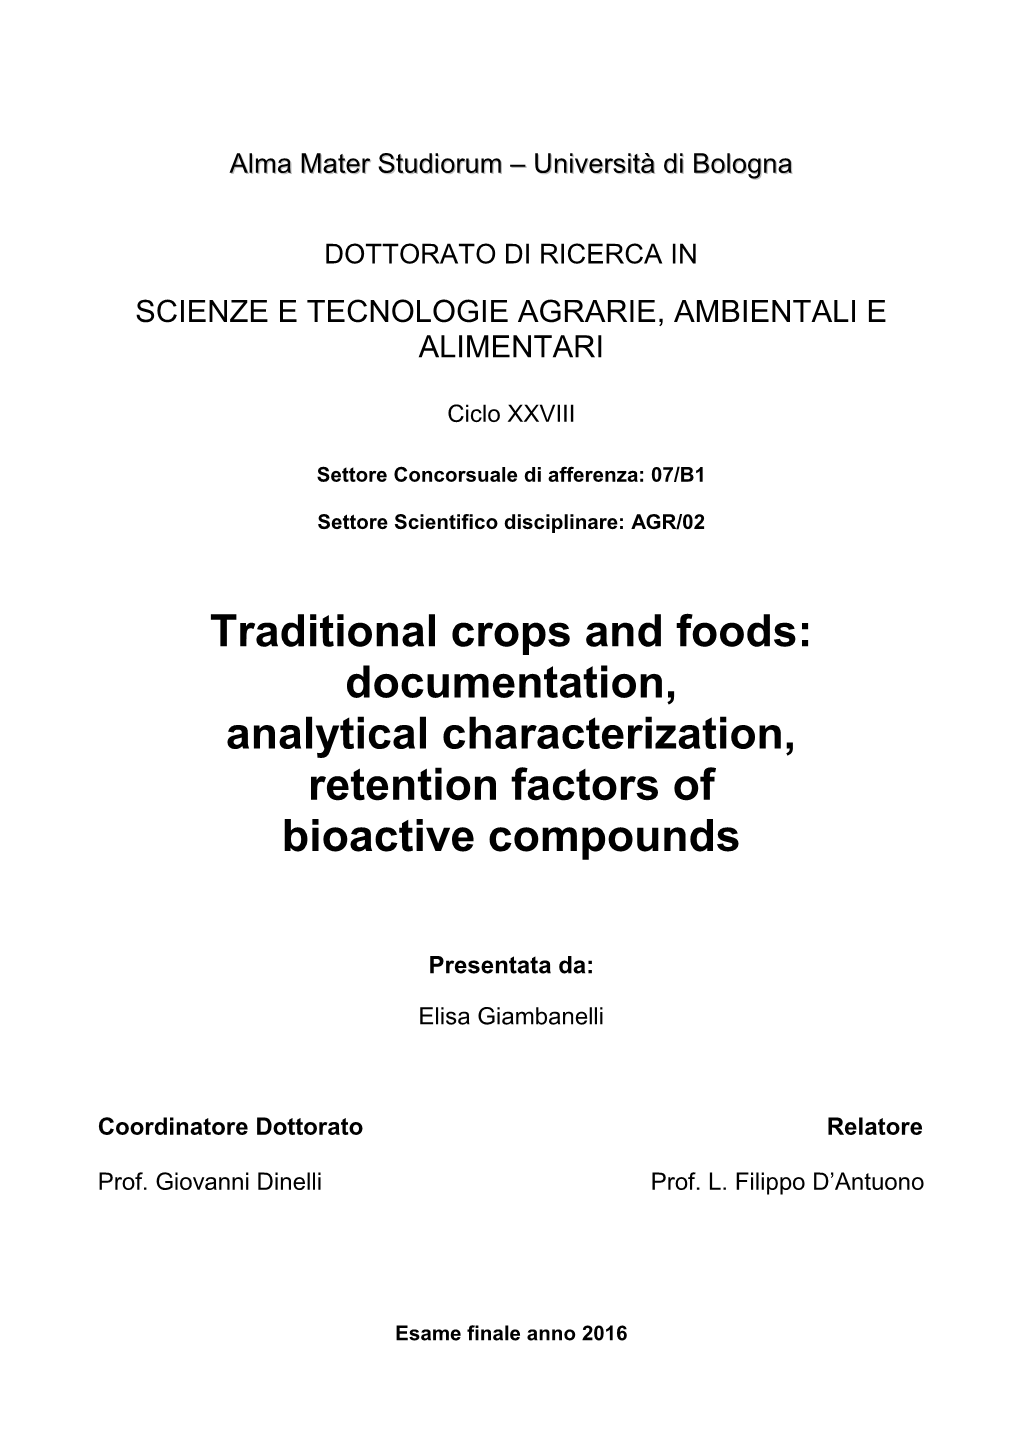 Traditional Crops and Foods: Documentation, Analytical Characterization, Retention Factors of Bioactive Compounds